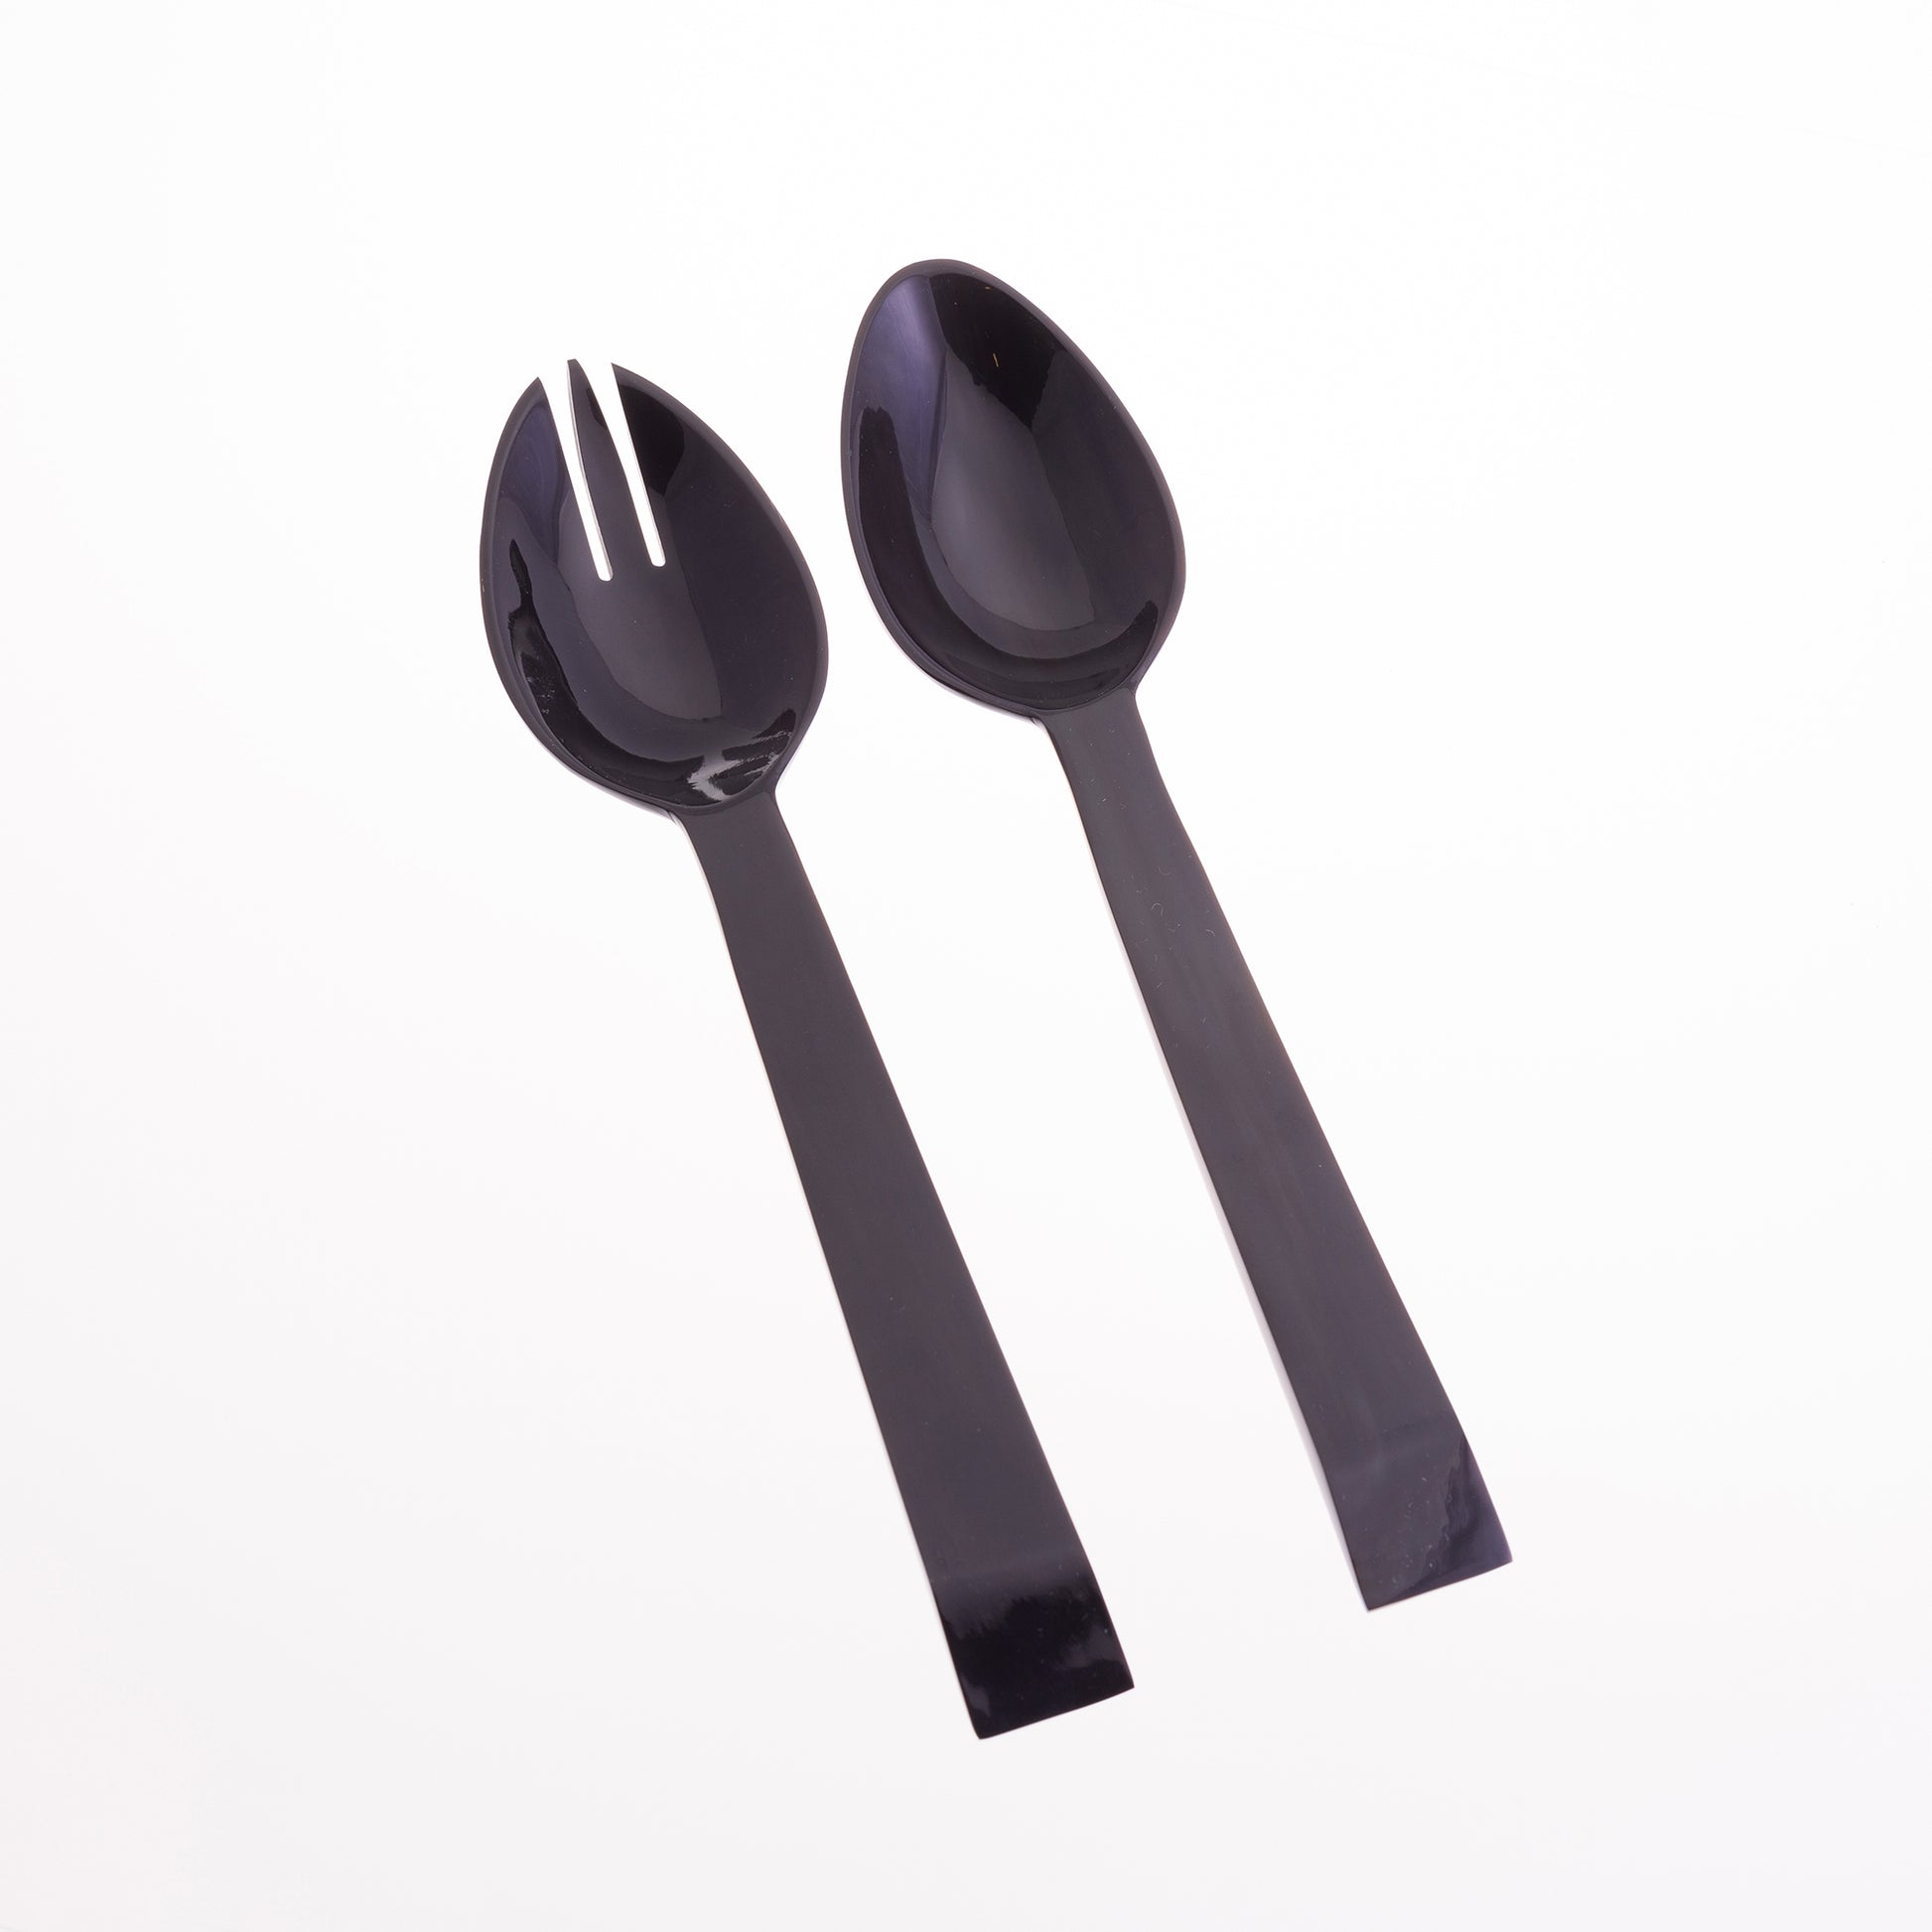 A black water buffalo horn spoon and fork